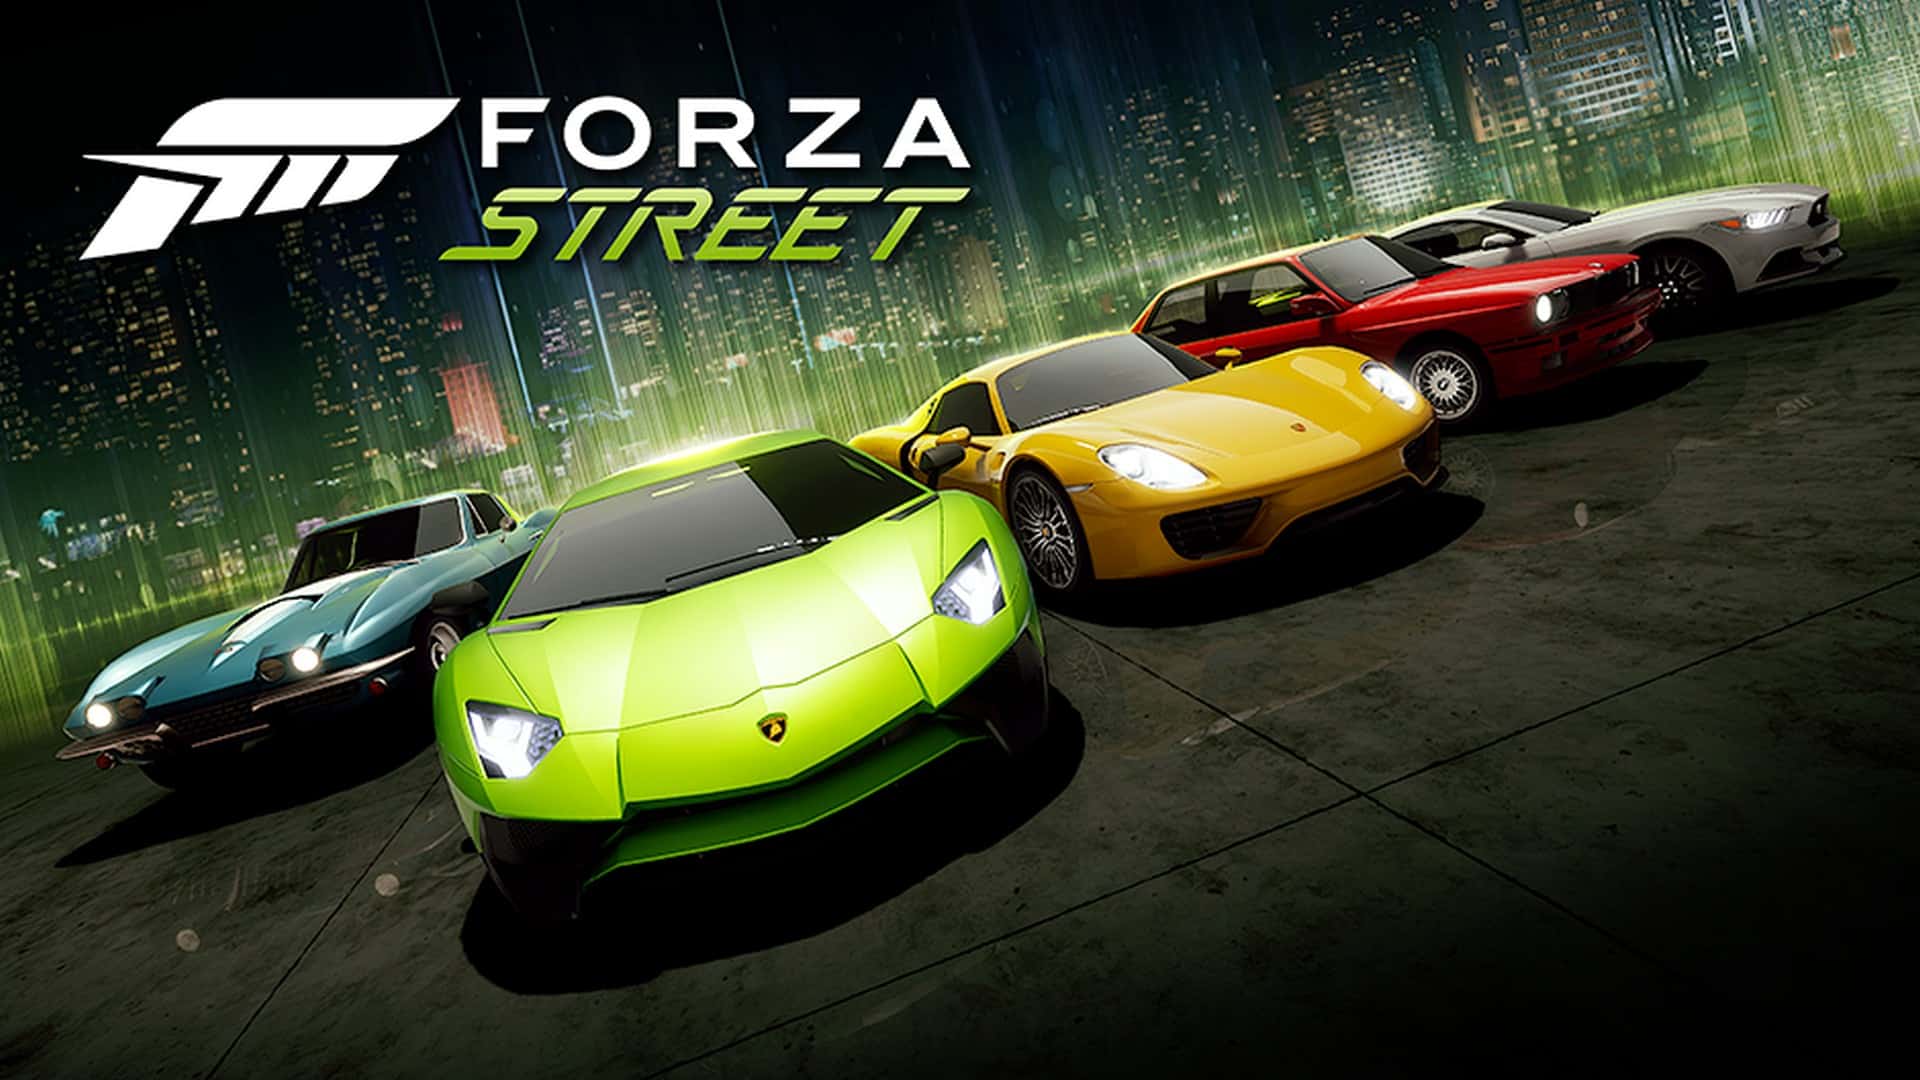 Turn 10 Studios Announces Forza Street For PC and Mobile Devices